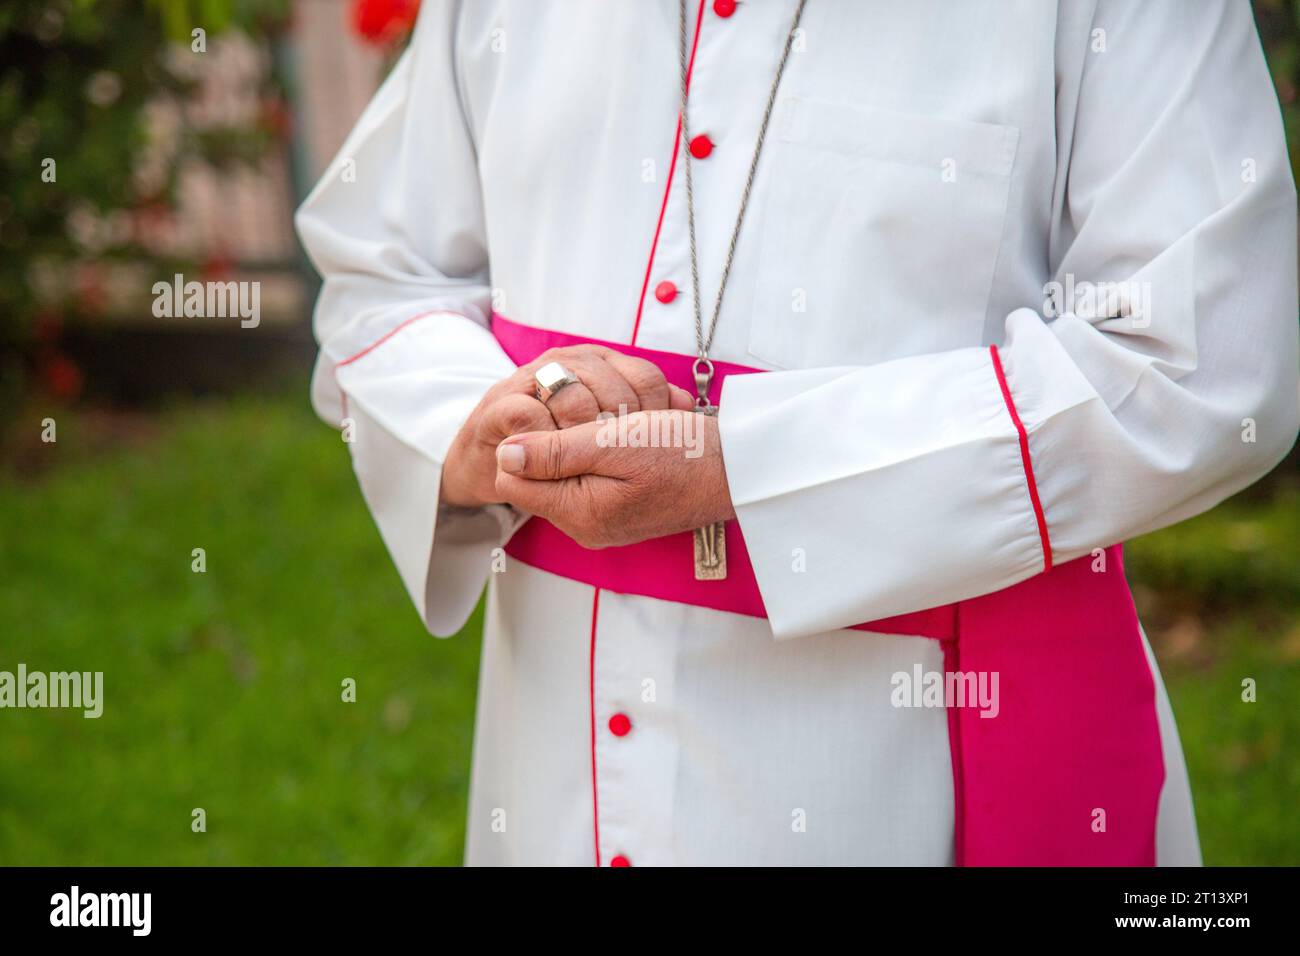 Bishop Theotonius Gomes, born on April 9, 1939, His Installation as Auxiliary Bishop of Dhaka was on 28 May, 1996. He was Bishop of Dinajpur Diocese. Stock Photo